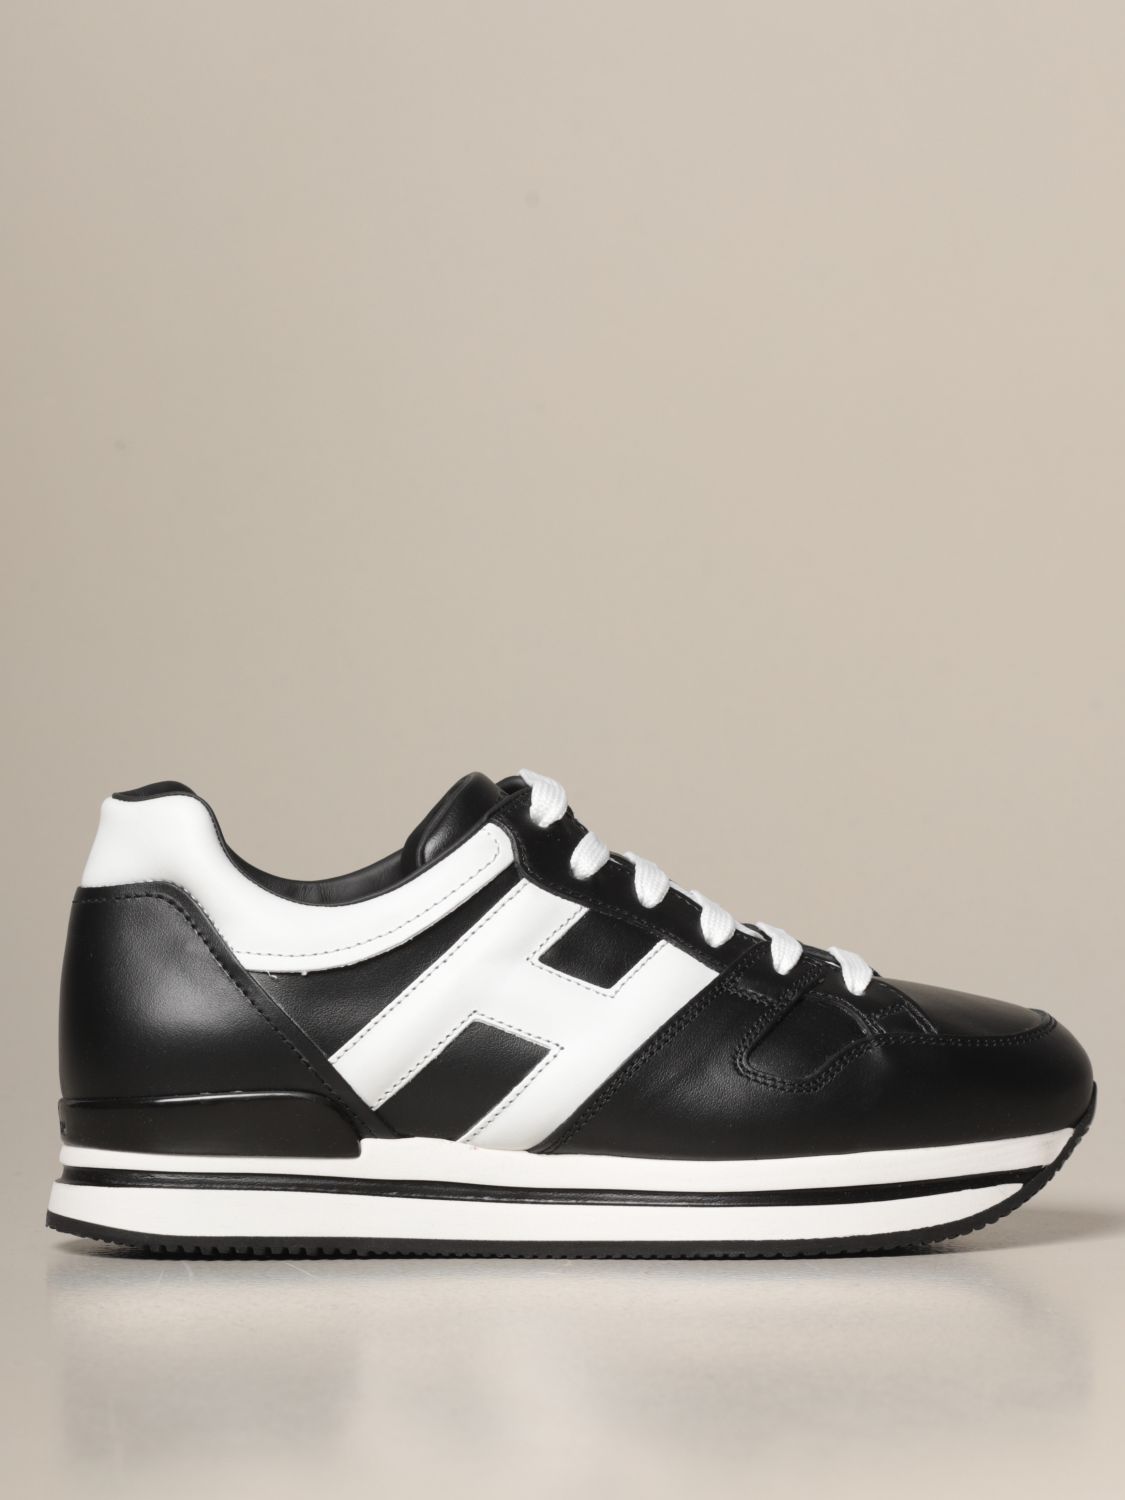 Hogan Outlet: H222 sneakers in smooth leather - Black | Hogan sneakers ...